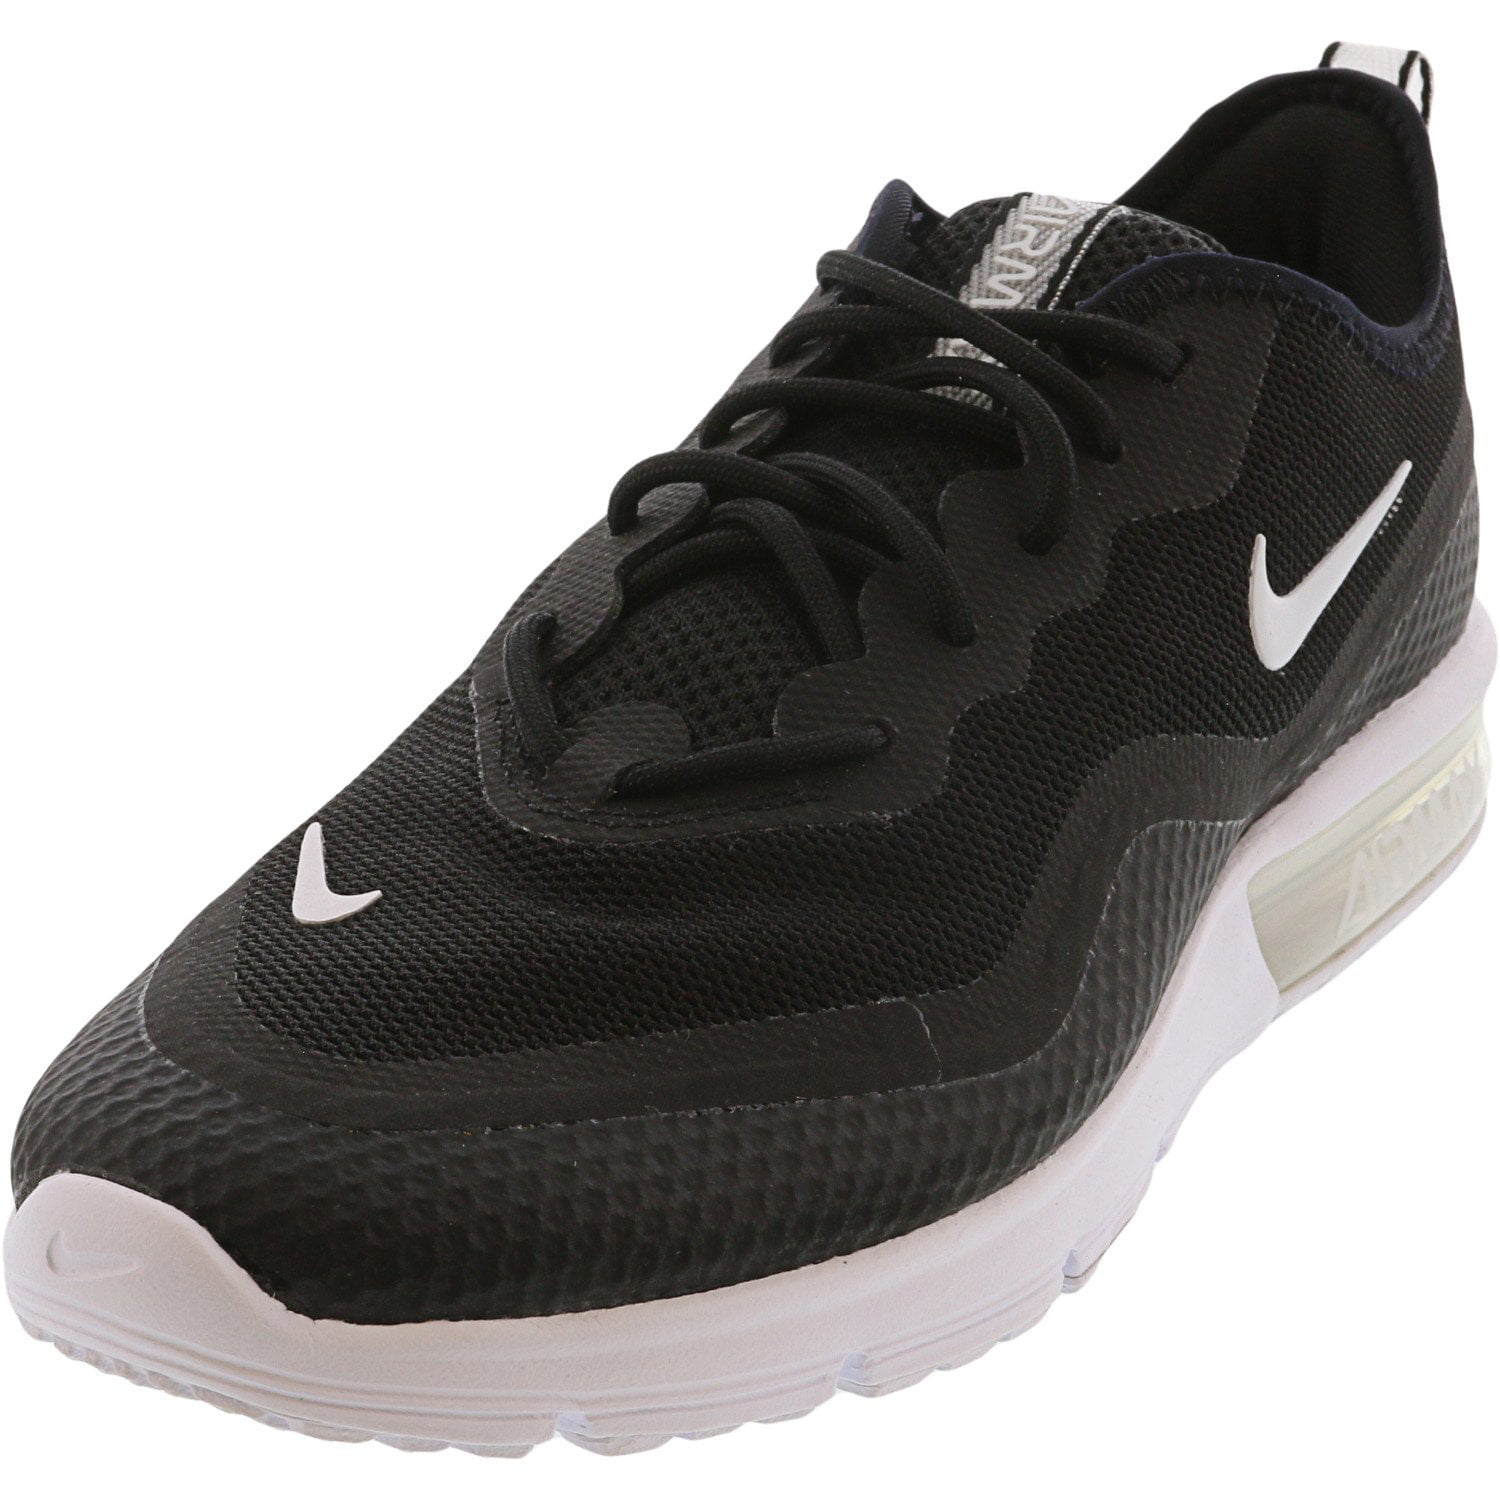 nike sequent women's